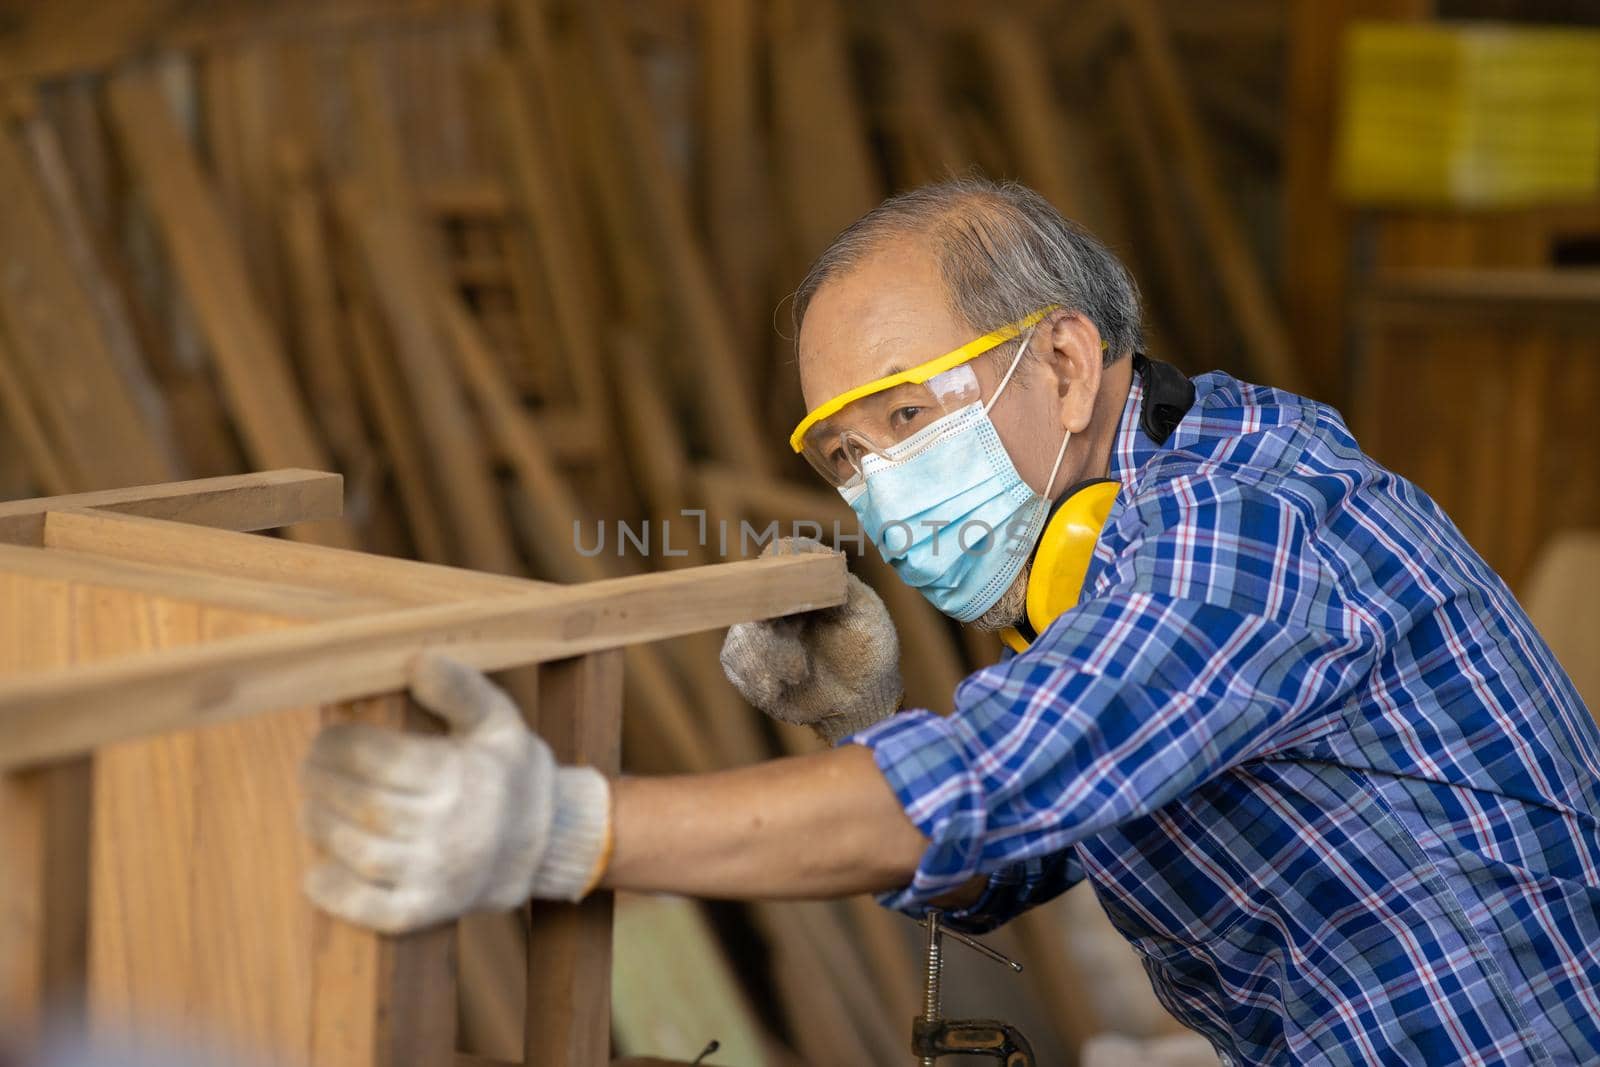 Elder worker wood woodcraft retire hobby for good retirement, Asian male mature professional master of making wooden furniture with face mask protective. by qualitystocks